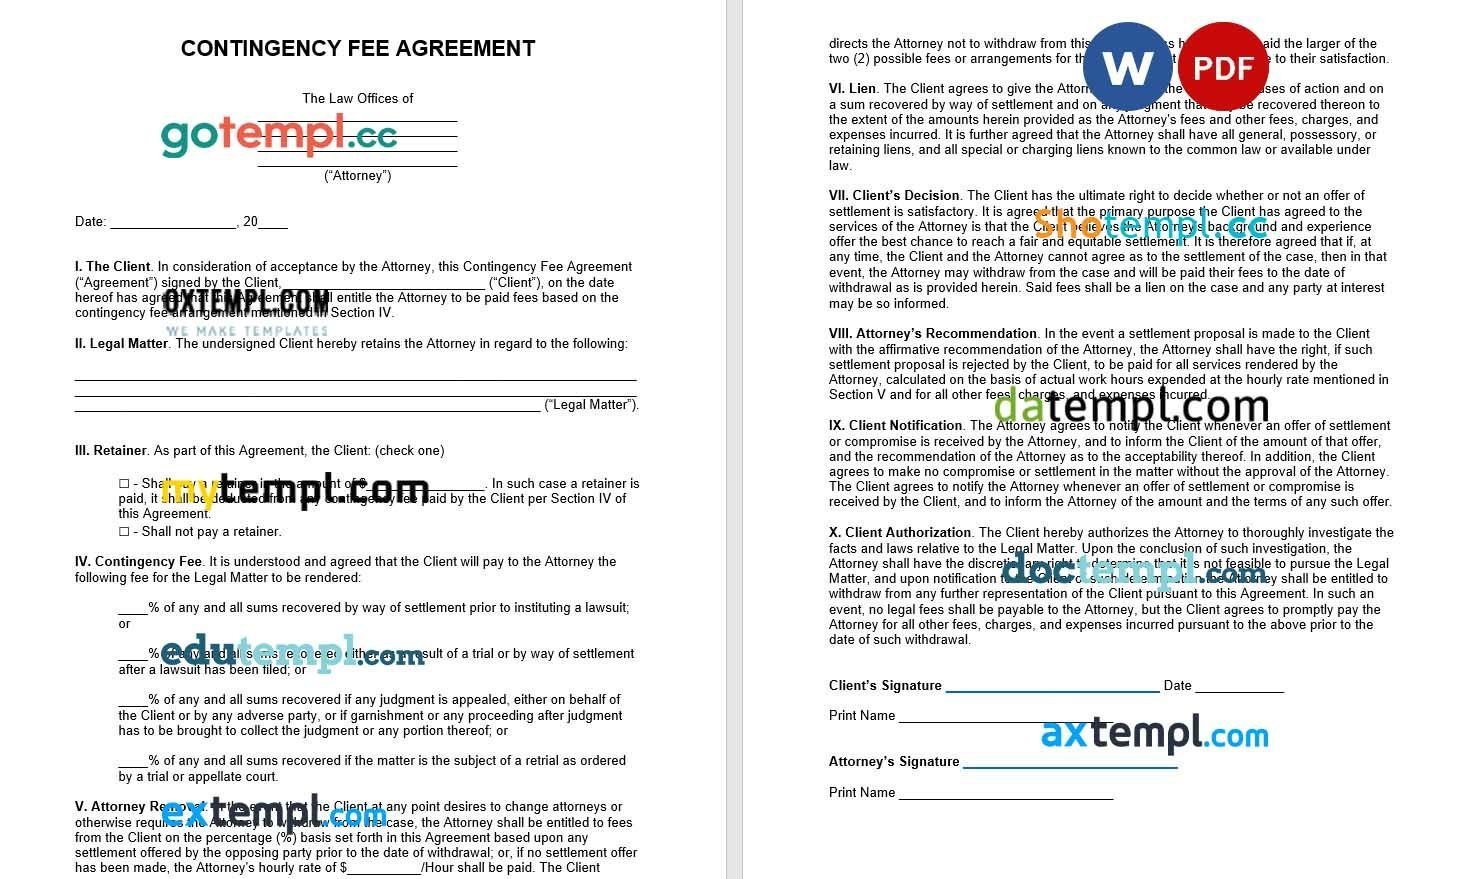 Contingency Fee Agreement Word example, fully editable